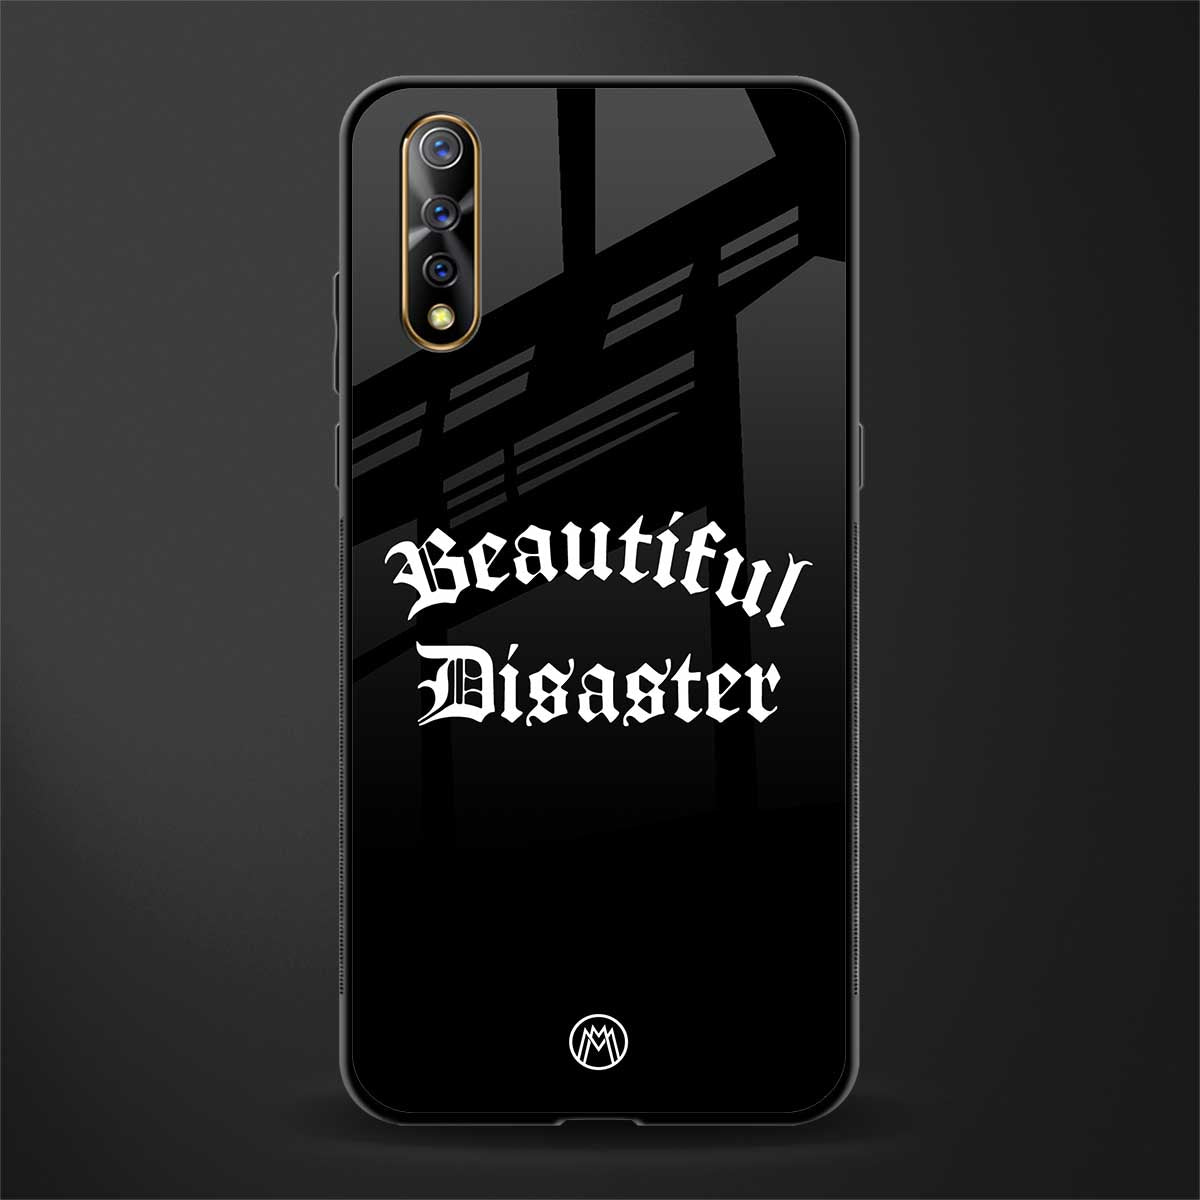 beautiful disaster glass case for vivo s1 image